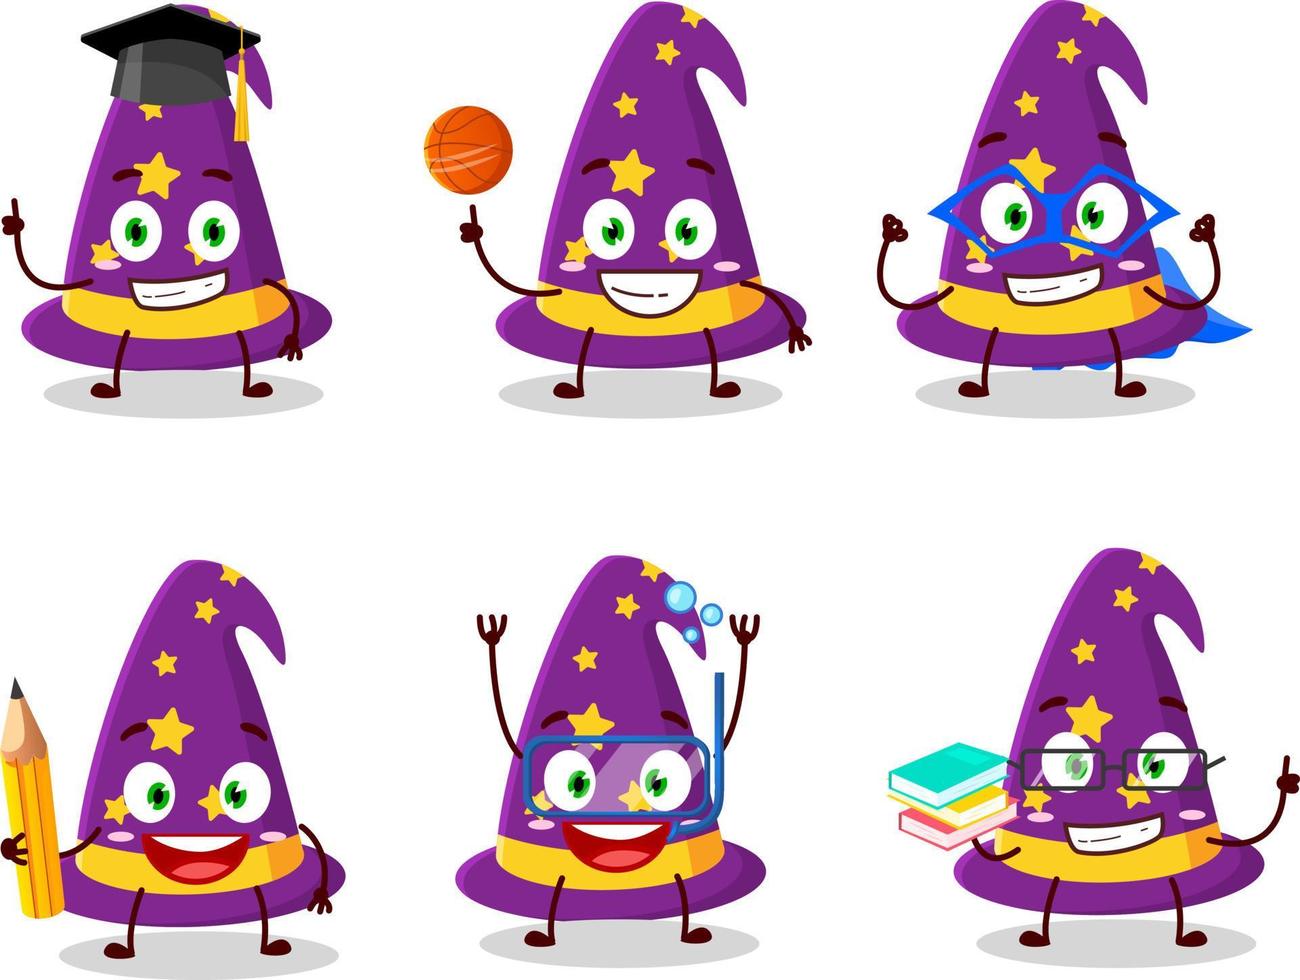 School student of wizard hat cartoon character with various expressions vector